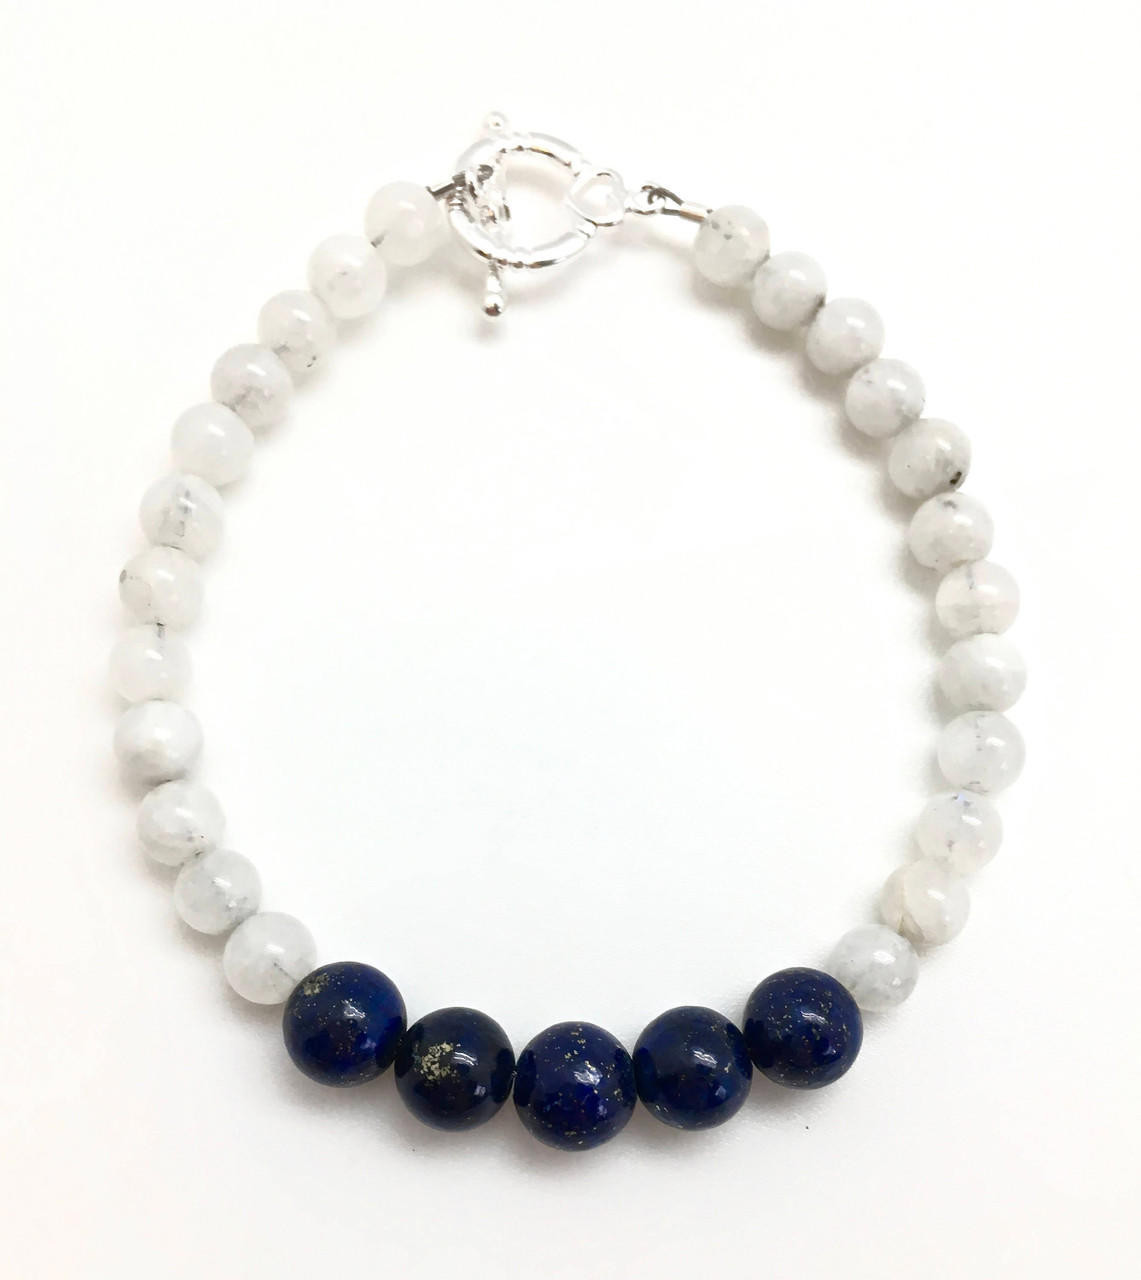 Energy Protection Clasp Bracelet - 6mm Beads